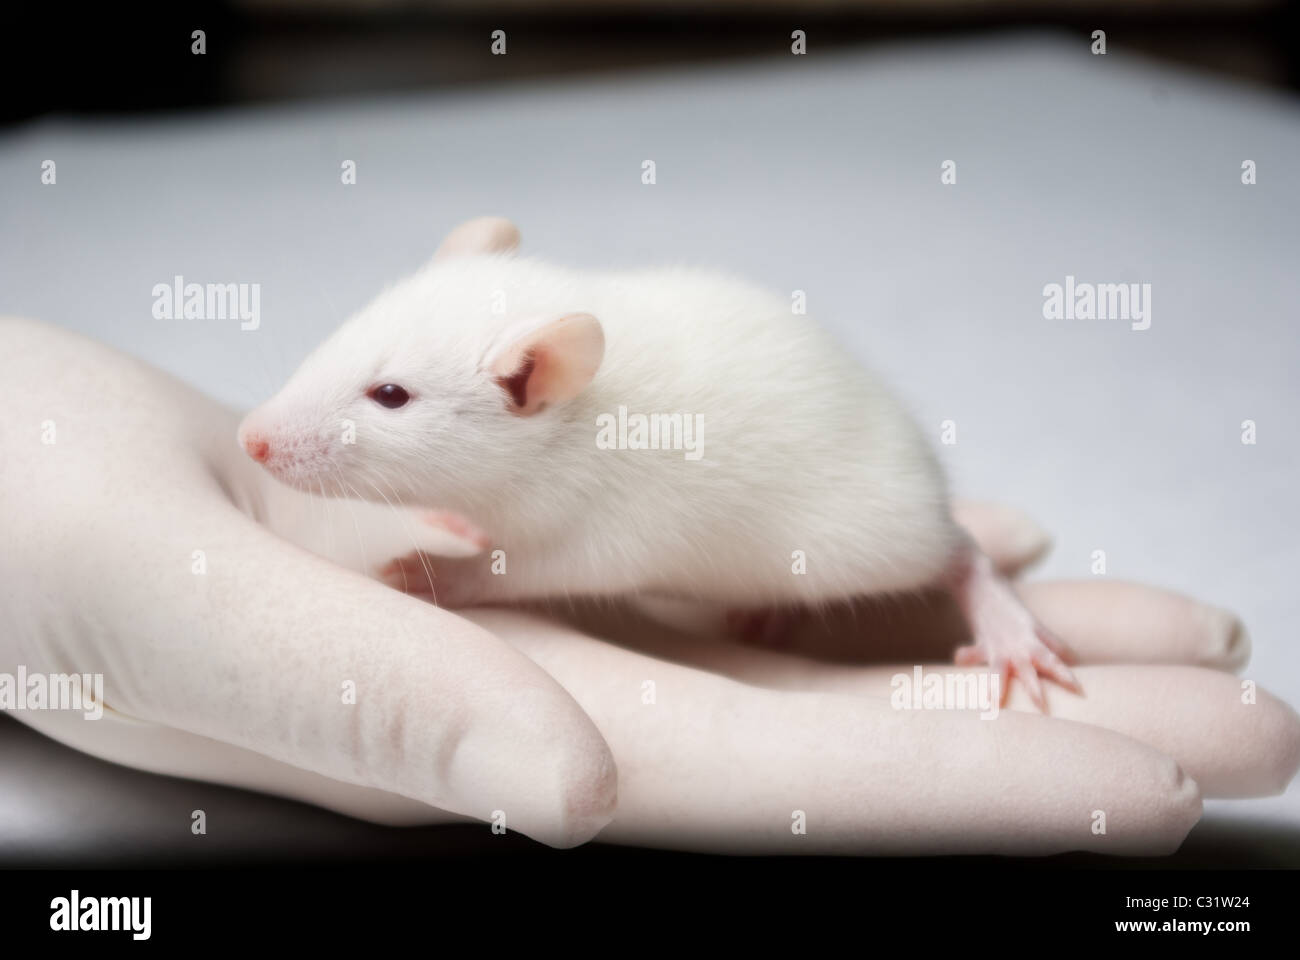 baby albino rat held in hand with a glove by researcher Stock Photo